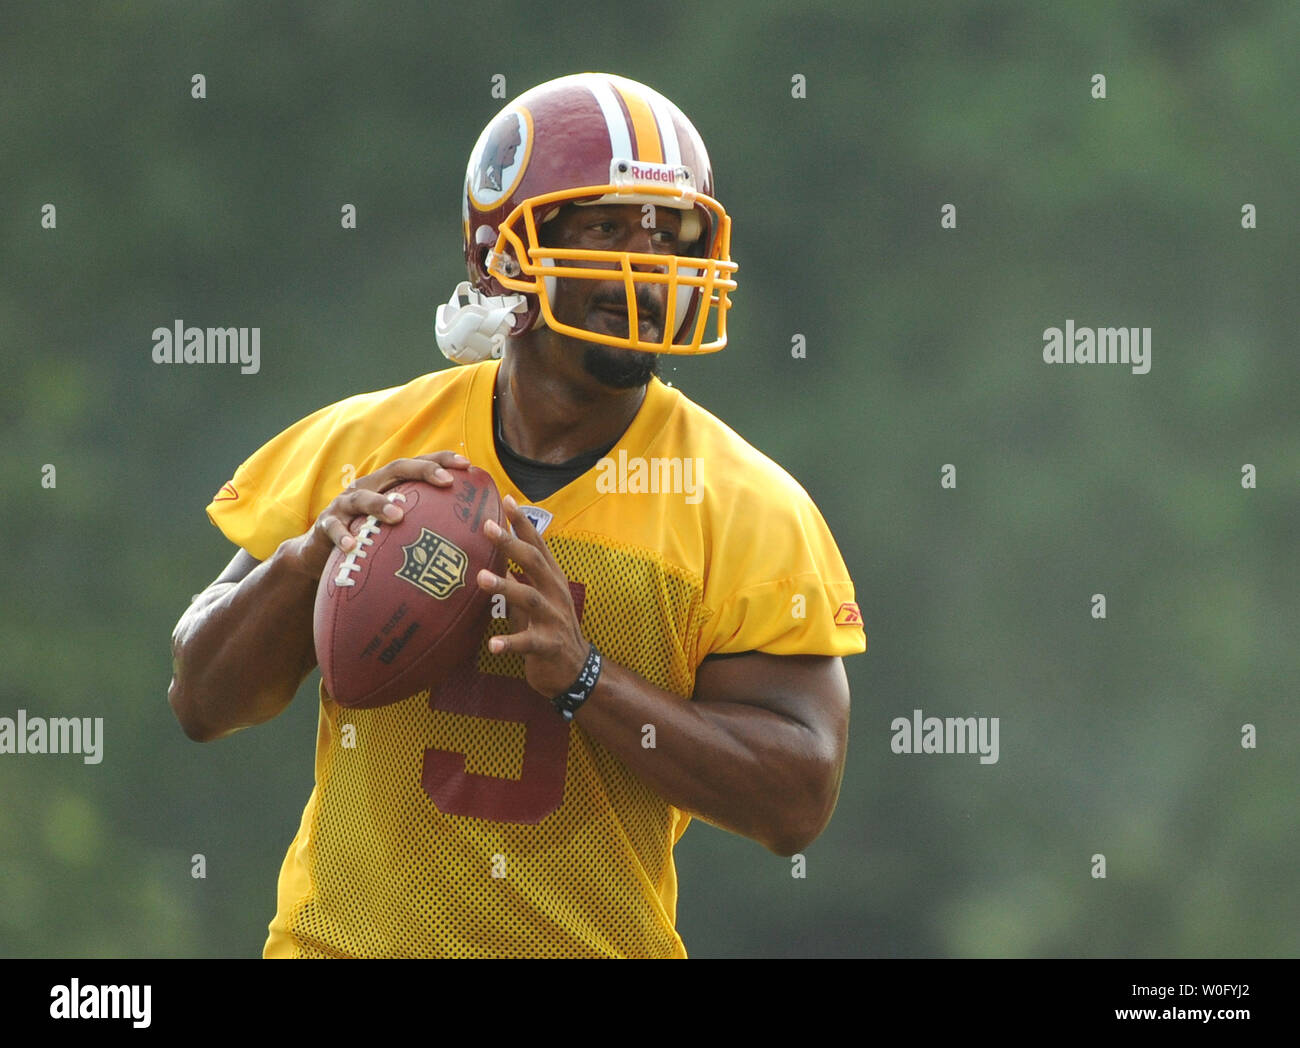 Washington Redskins quarterback Donovan McNabb drops back to pass during the last day of Redskins training camp at Redskins Park in Ashburn, Virginia, August 19, 2010. UPI/Kevin Dietsch Stock Photo